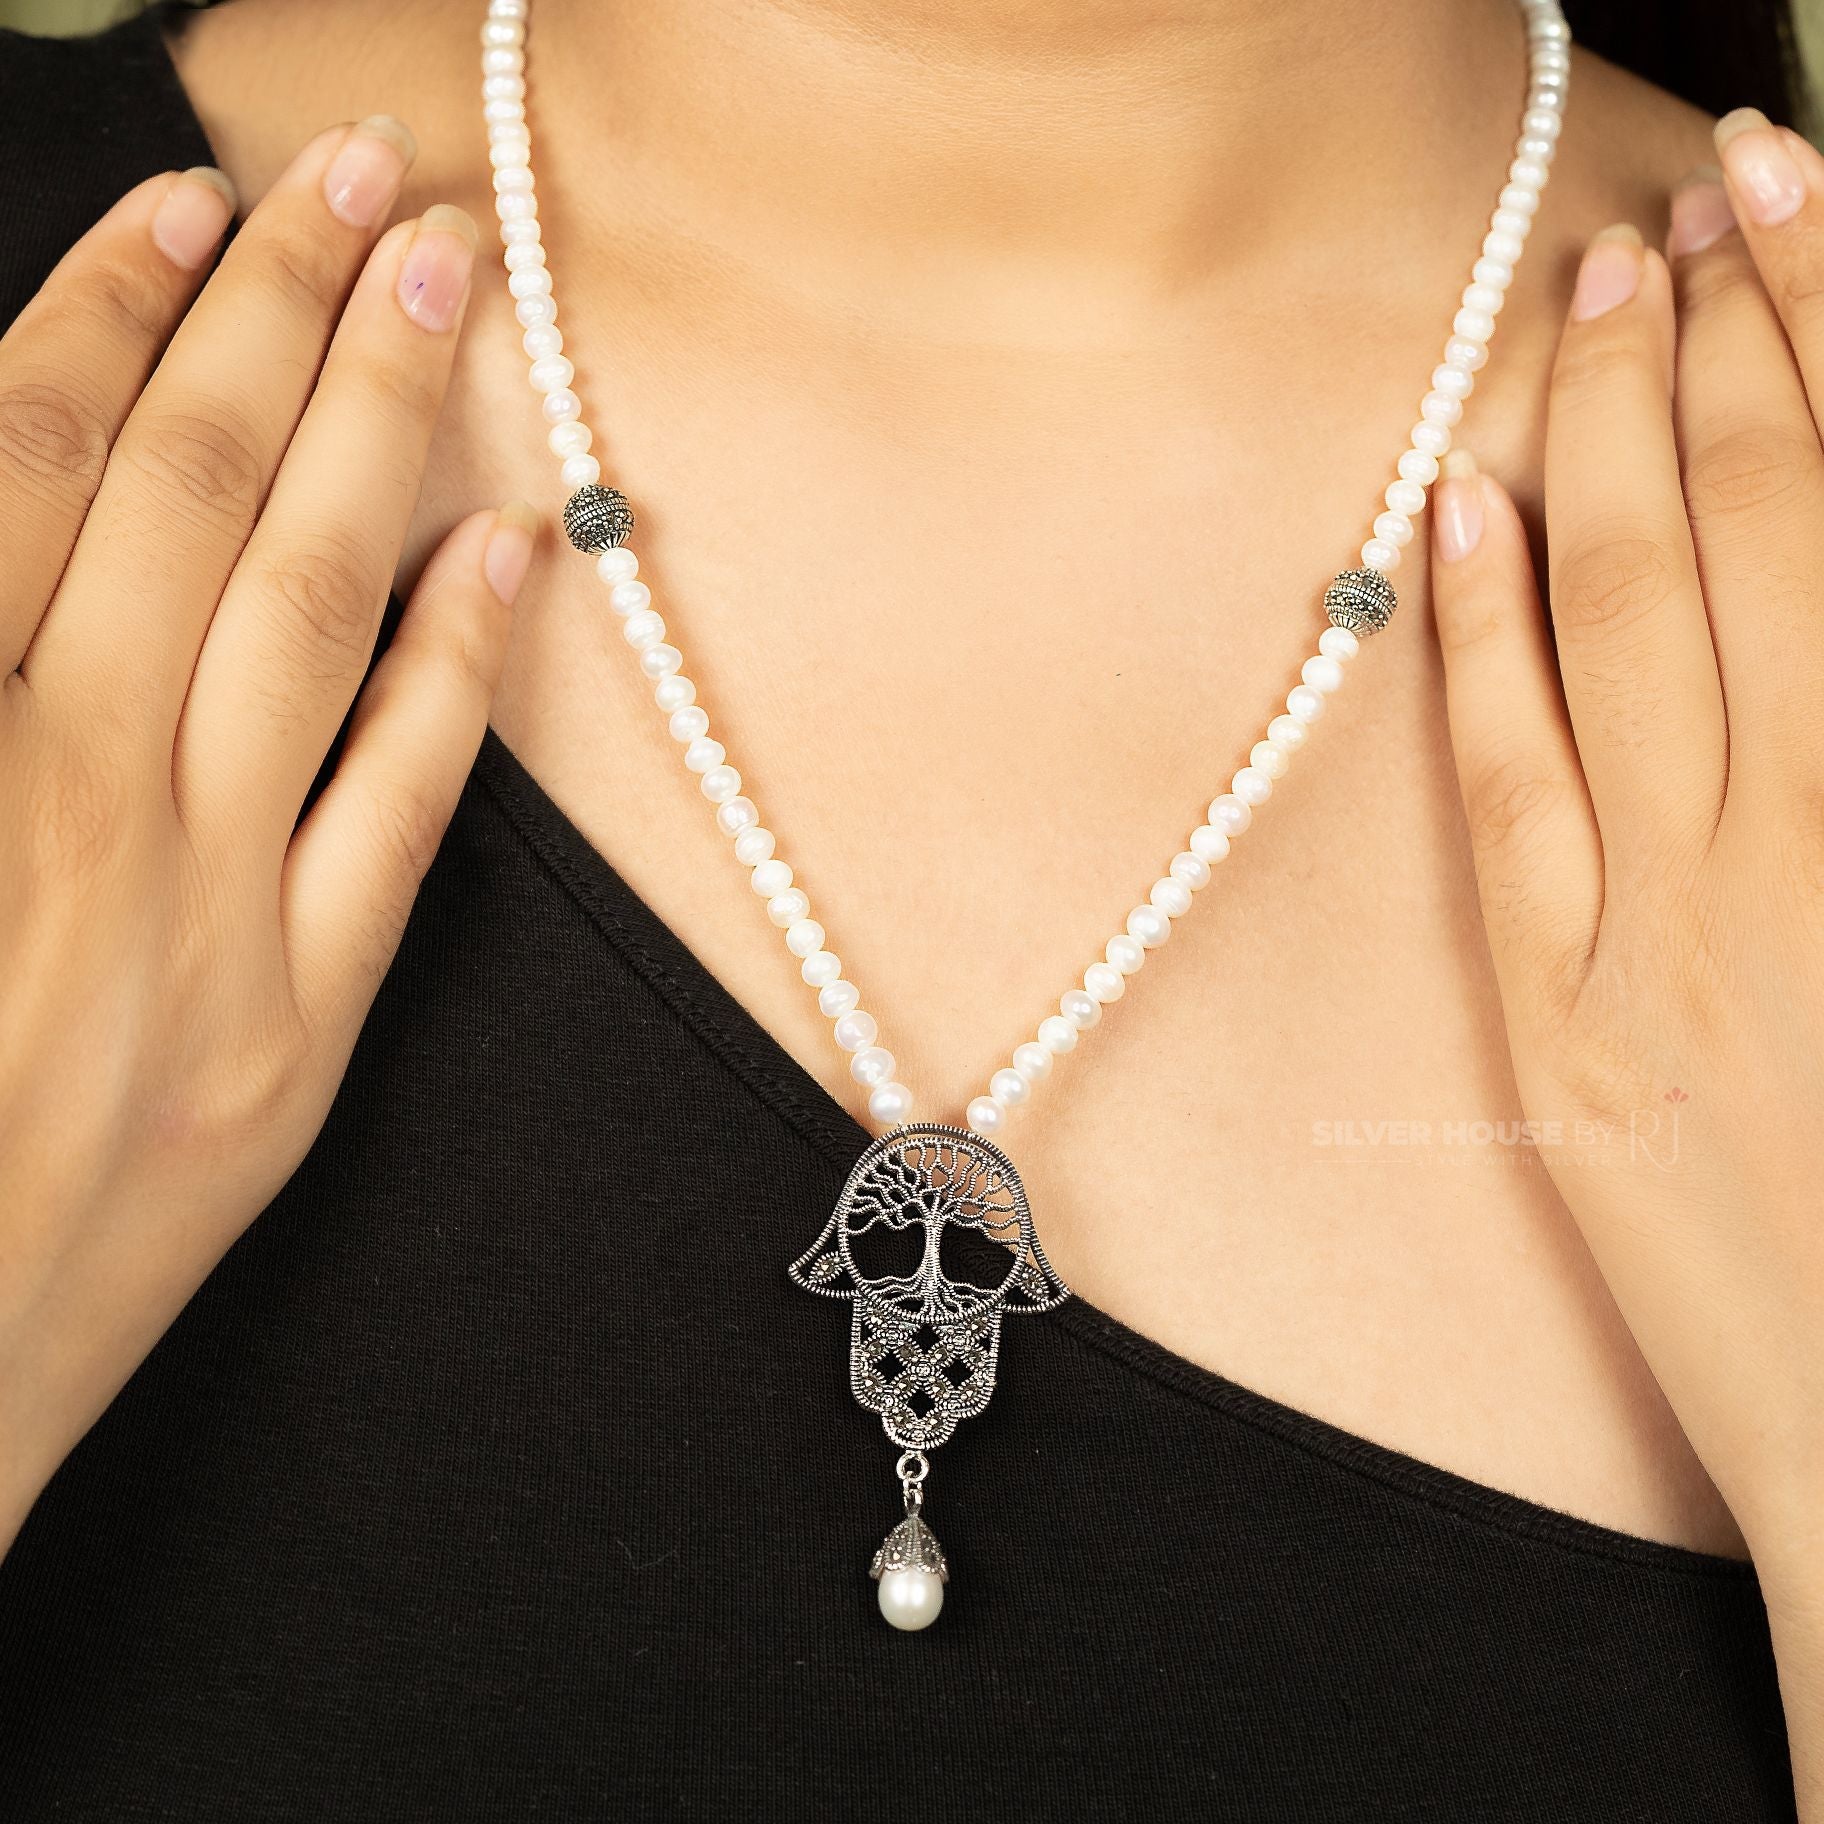 Exquisite Pearl Necklace With Classic Marcasite Stone Studded Pendant silverhousebyrj